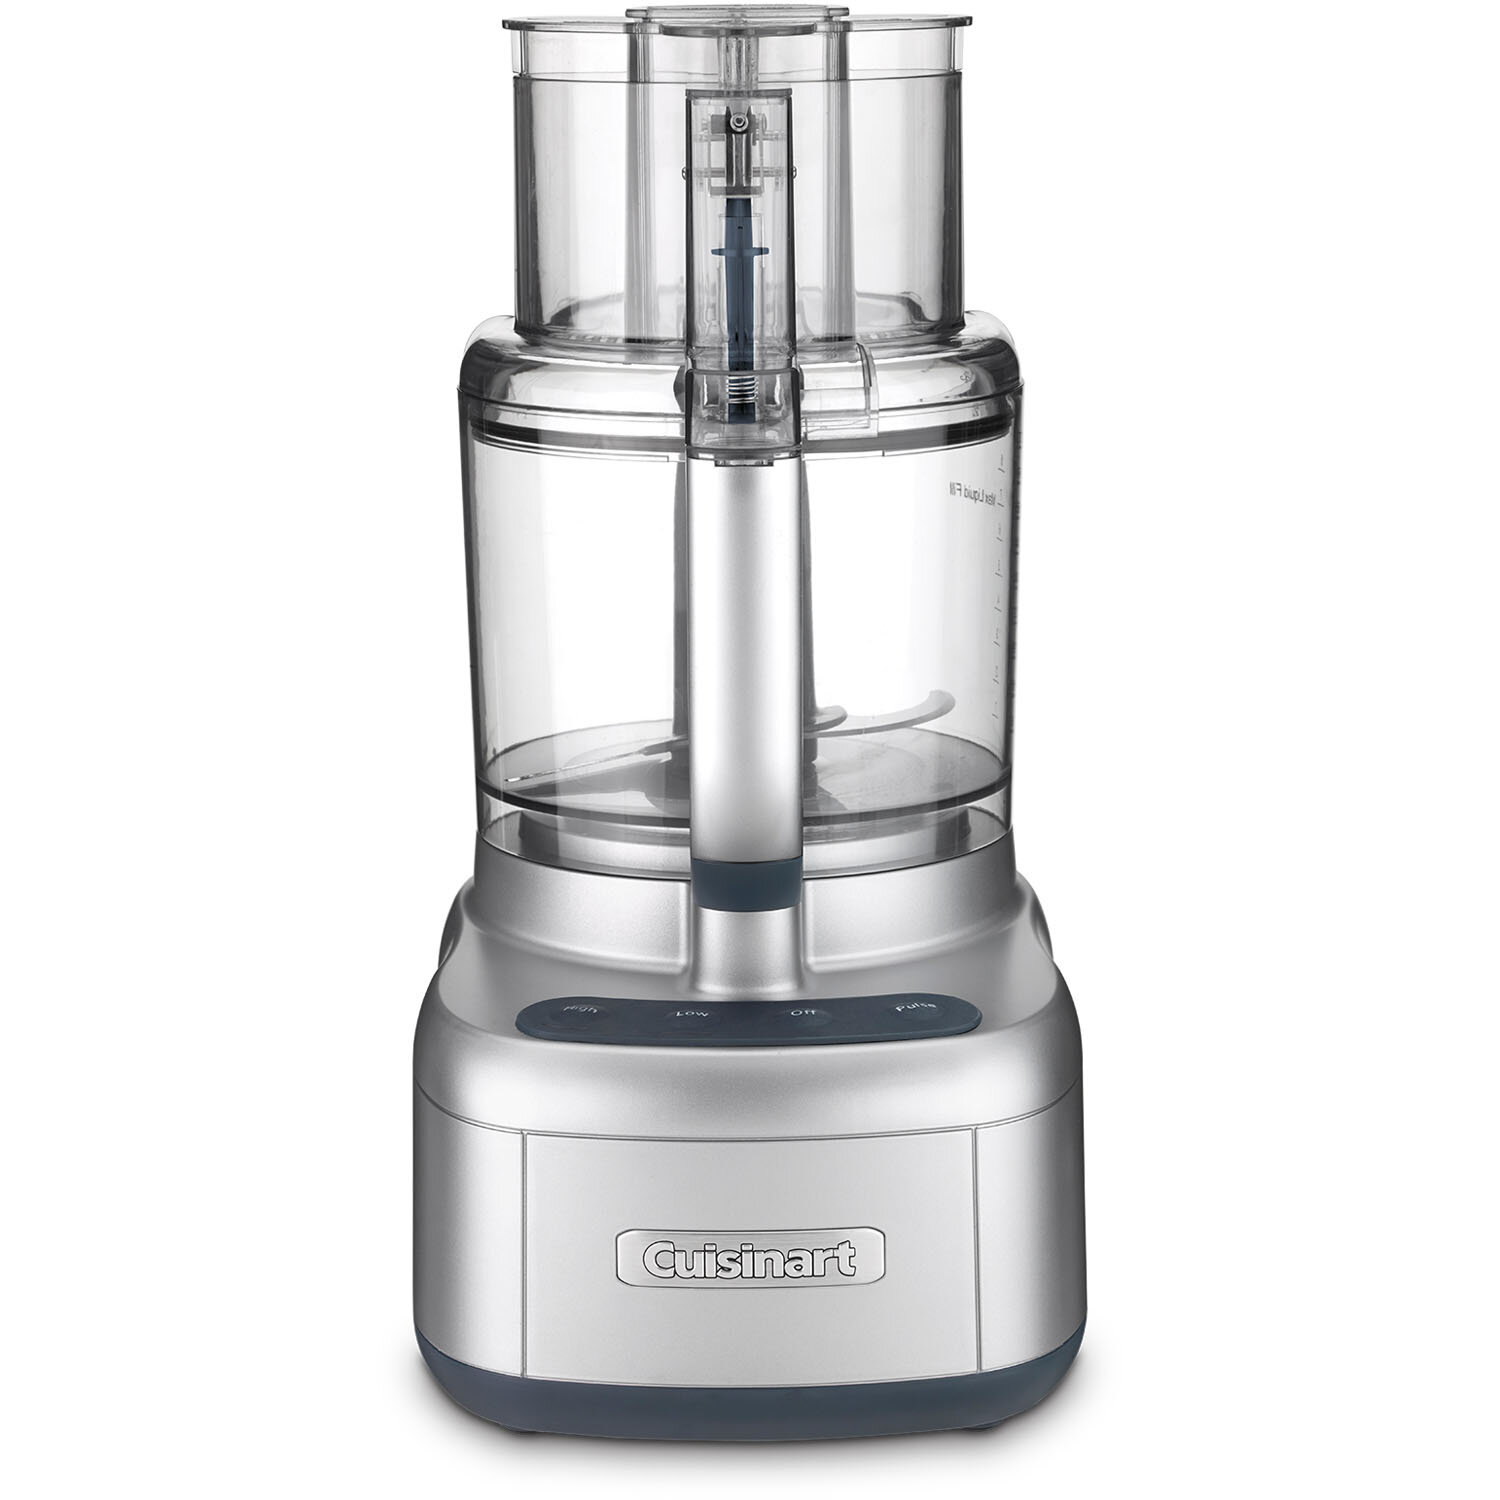 Cuisinart 9 Cup Continuous Feed Food Processor Black